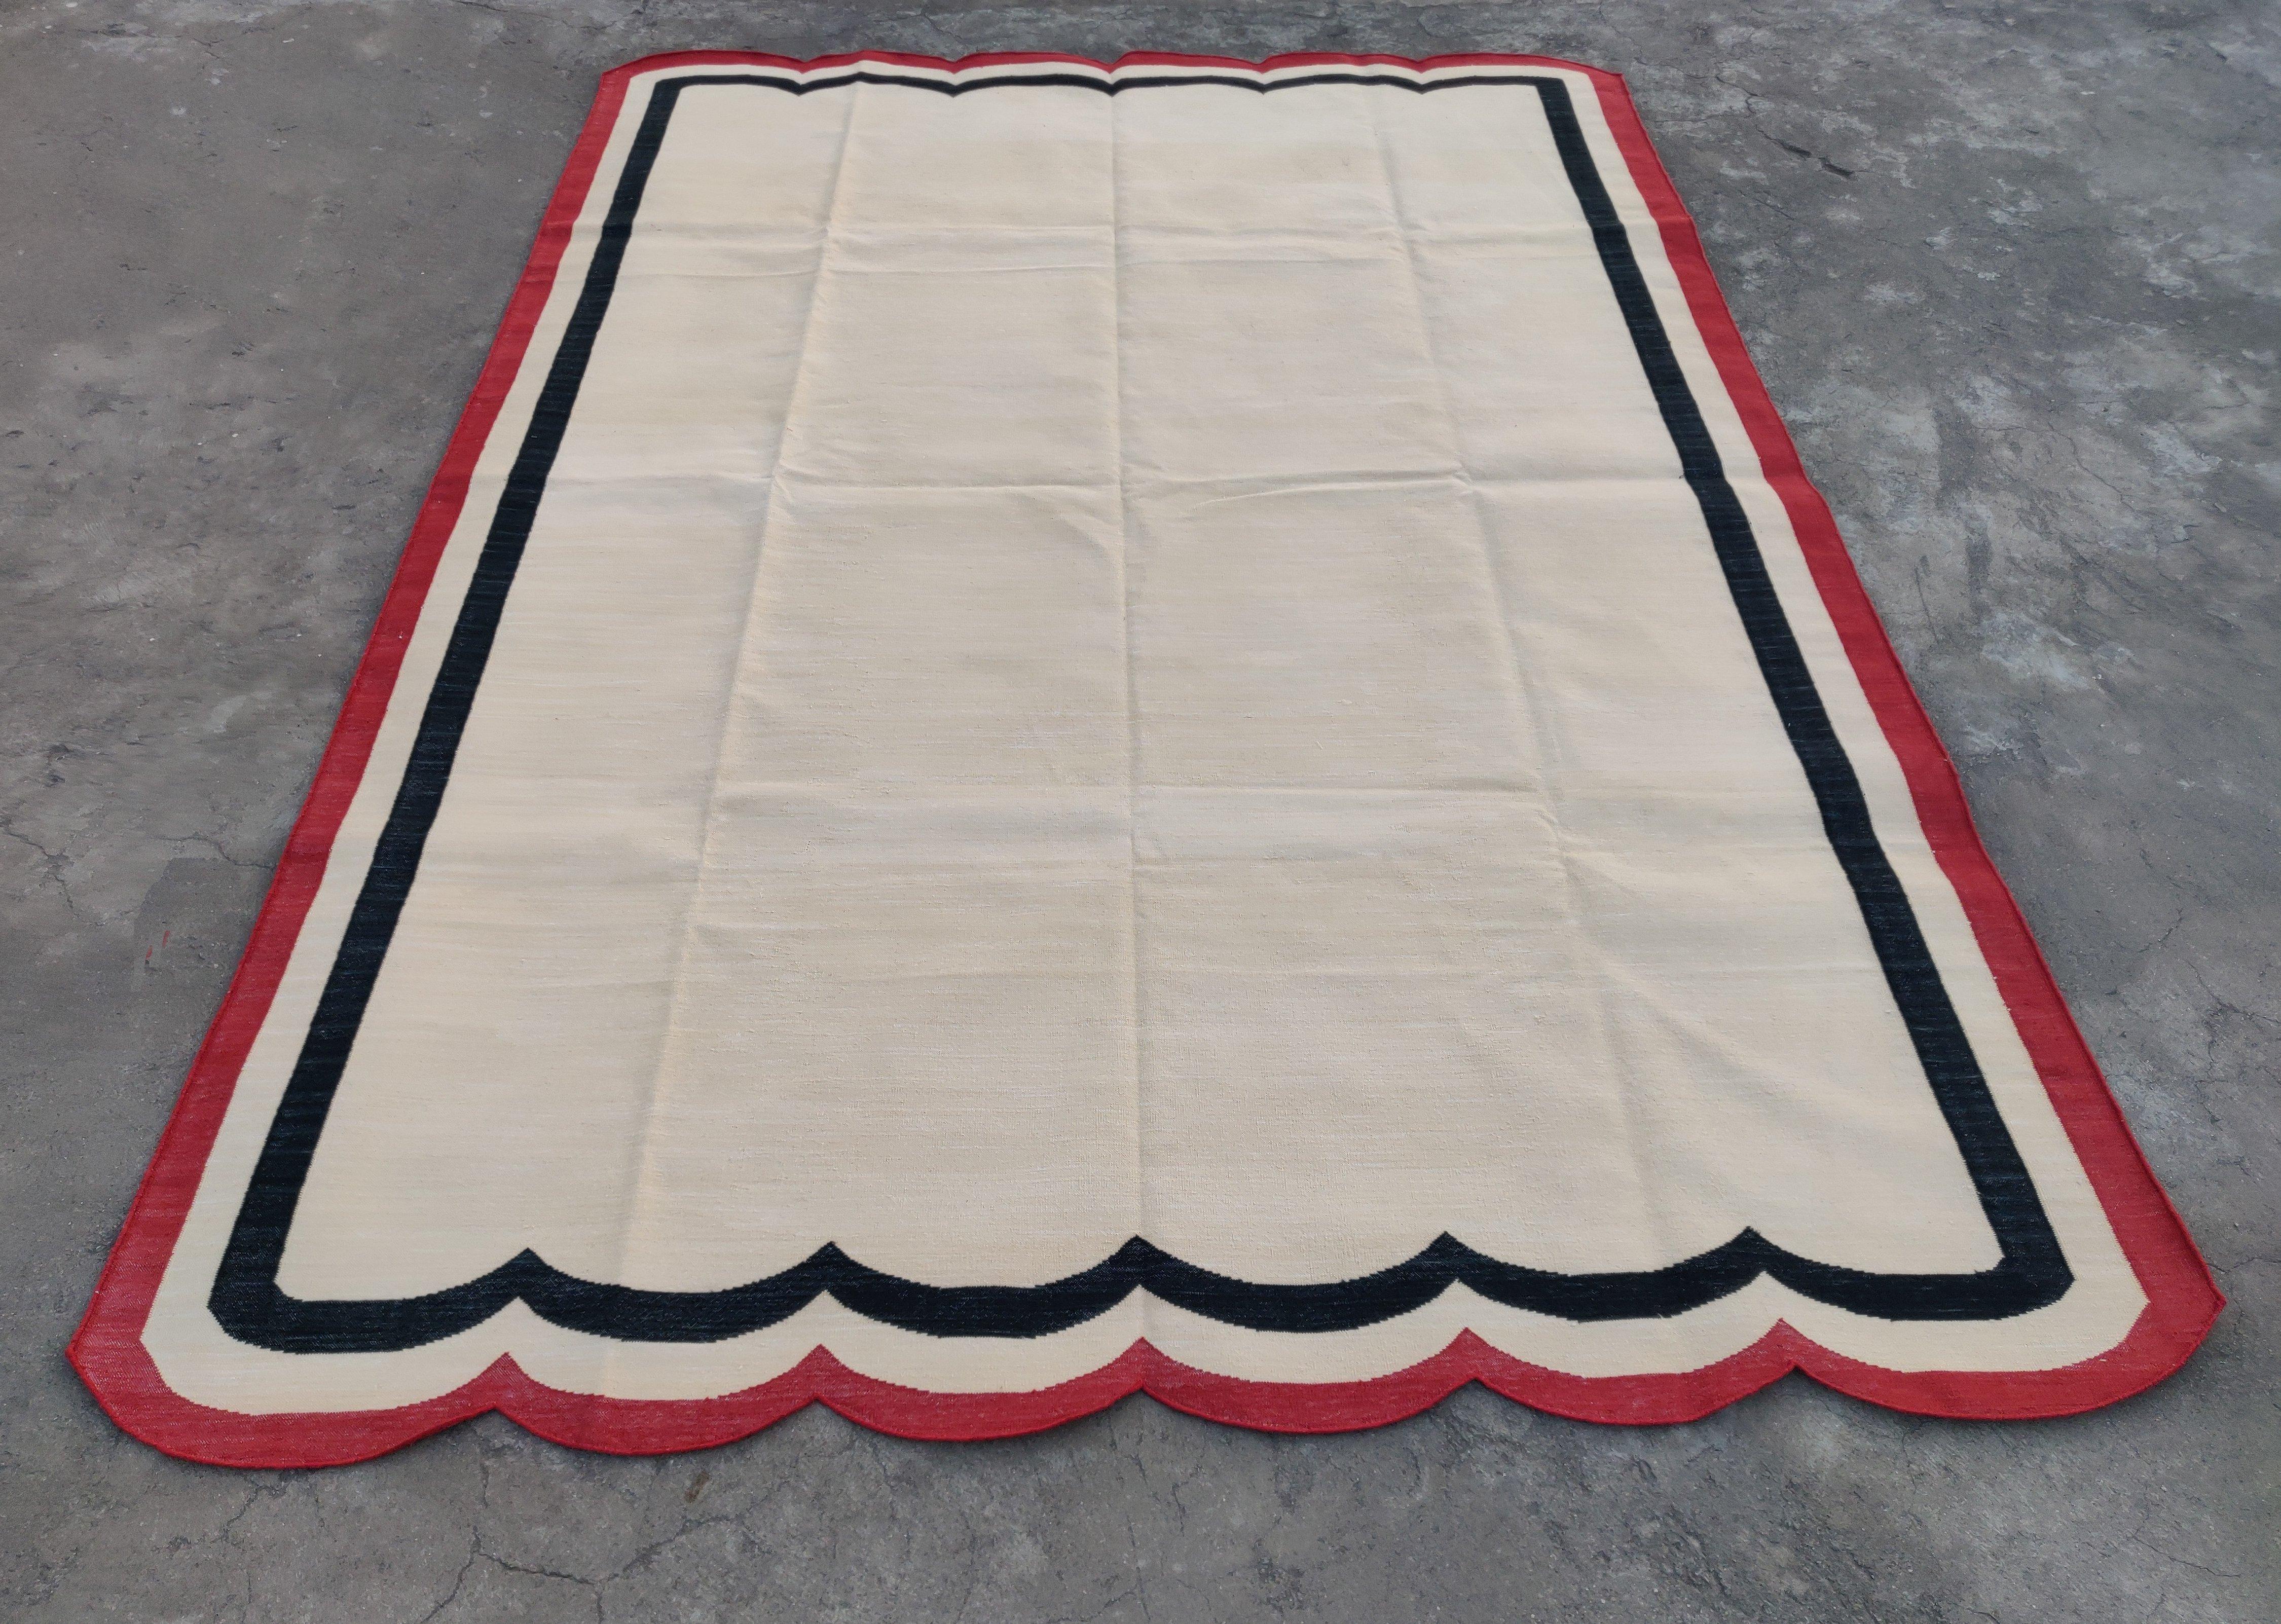 Handmade Cotton Area Flat Weave Rug, 6x9 Cream And Red Scalloped Kilim Dhurrie In New Condition For Sale In Jaipur, IN